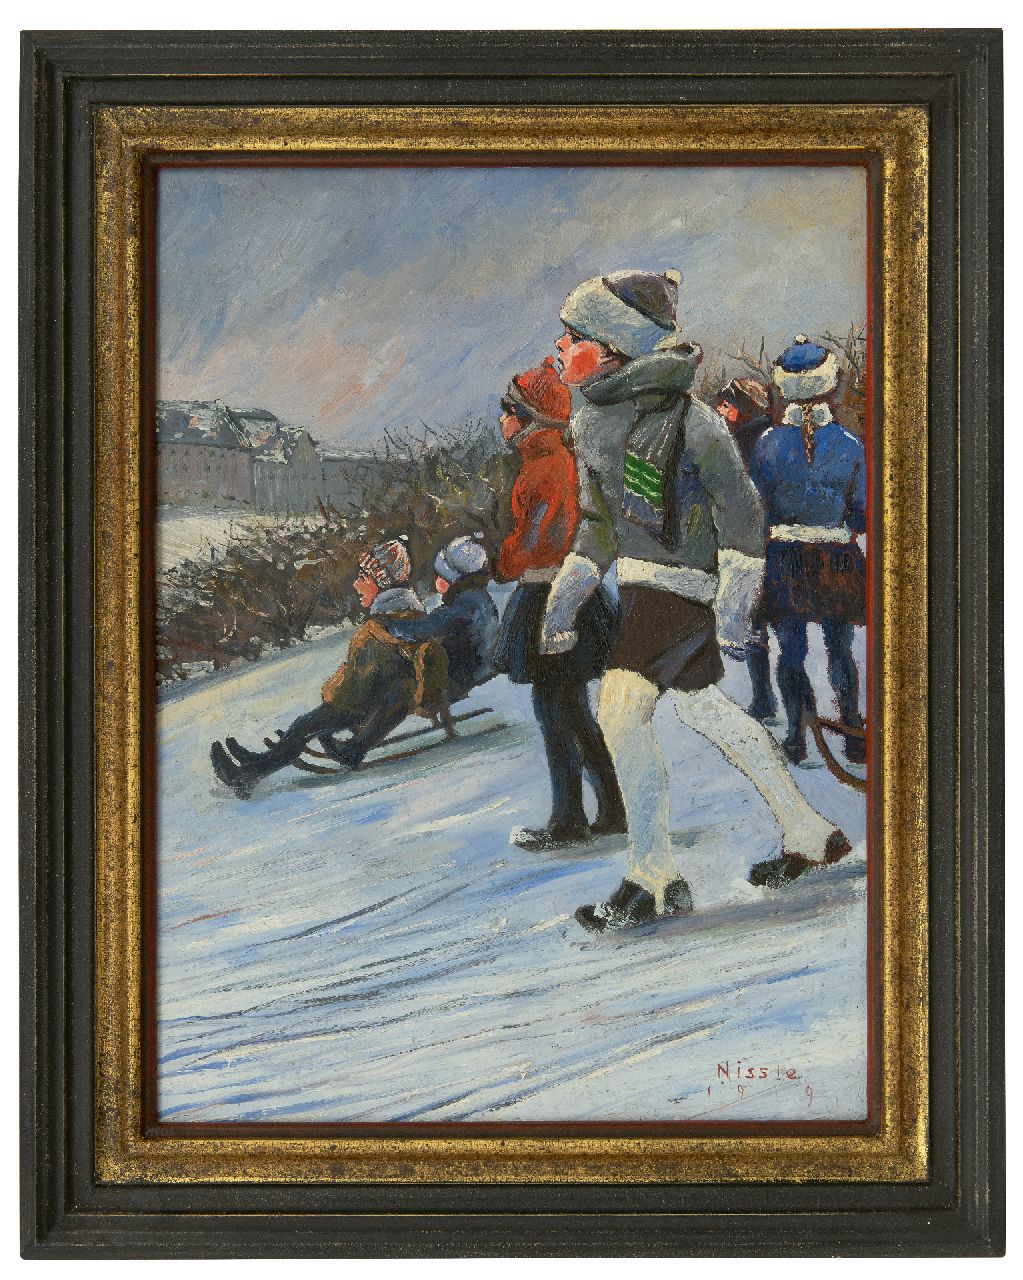 Nissle F.  | Fritz Nissle | Paintings offered for sale | Children on a sled going downhill, oil on painter's cardboard 41.6 x 31.2 cm, signed l.r. and dated 1919